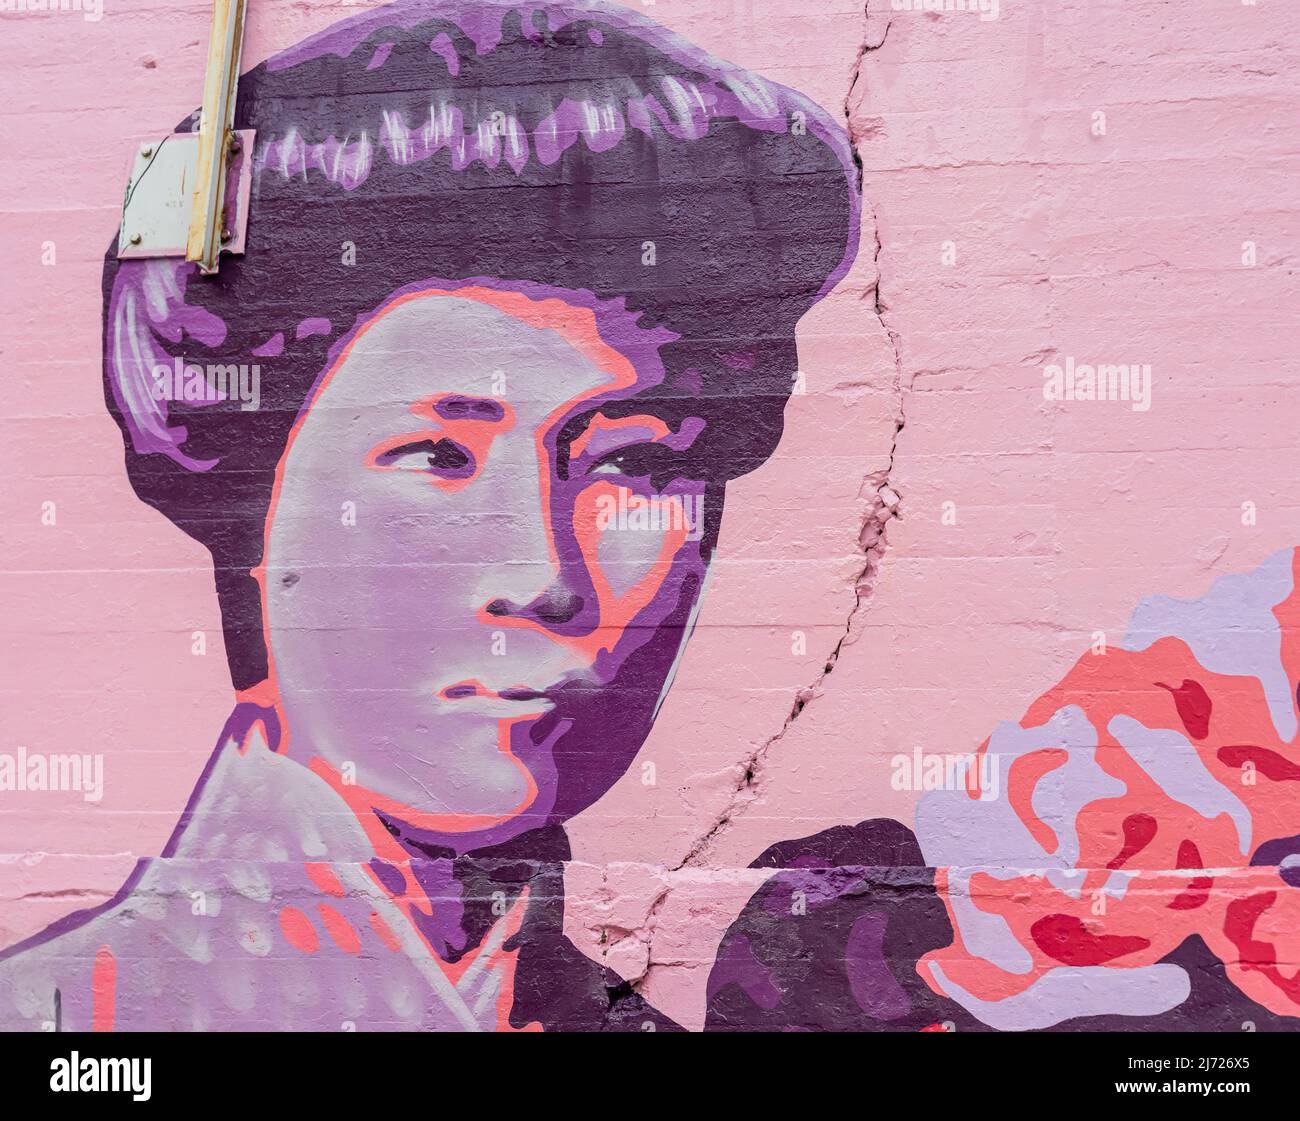 Mural of Japanese journalist Kanno Sugako, Concepcion feminist mural  La unión hace la fuerza,  on the wall in, Madrid Spain Stock Photo